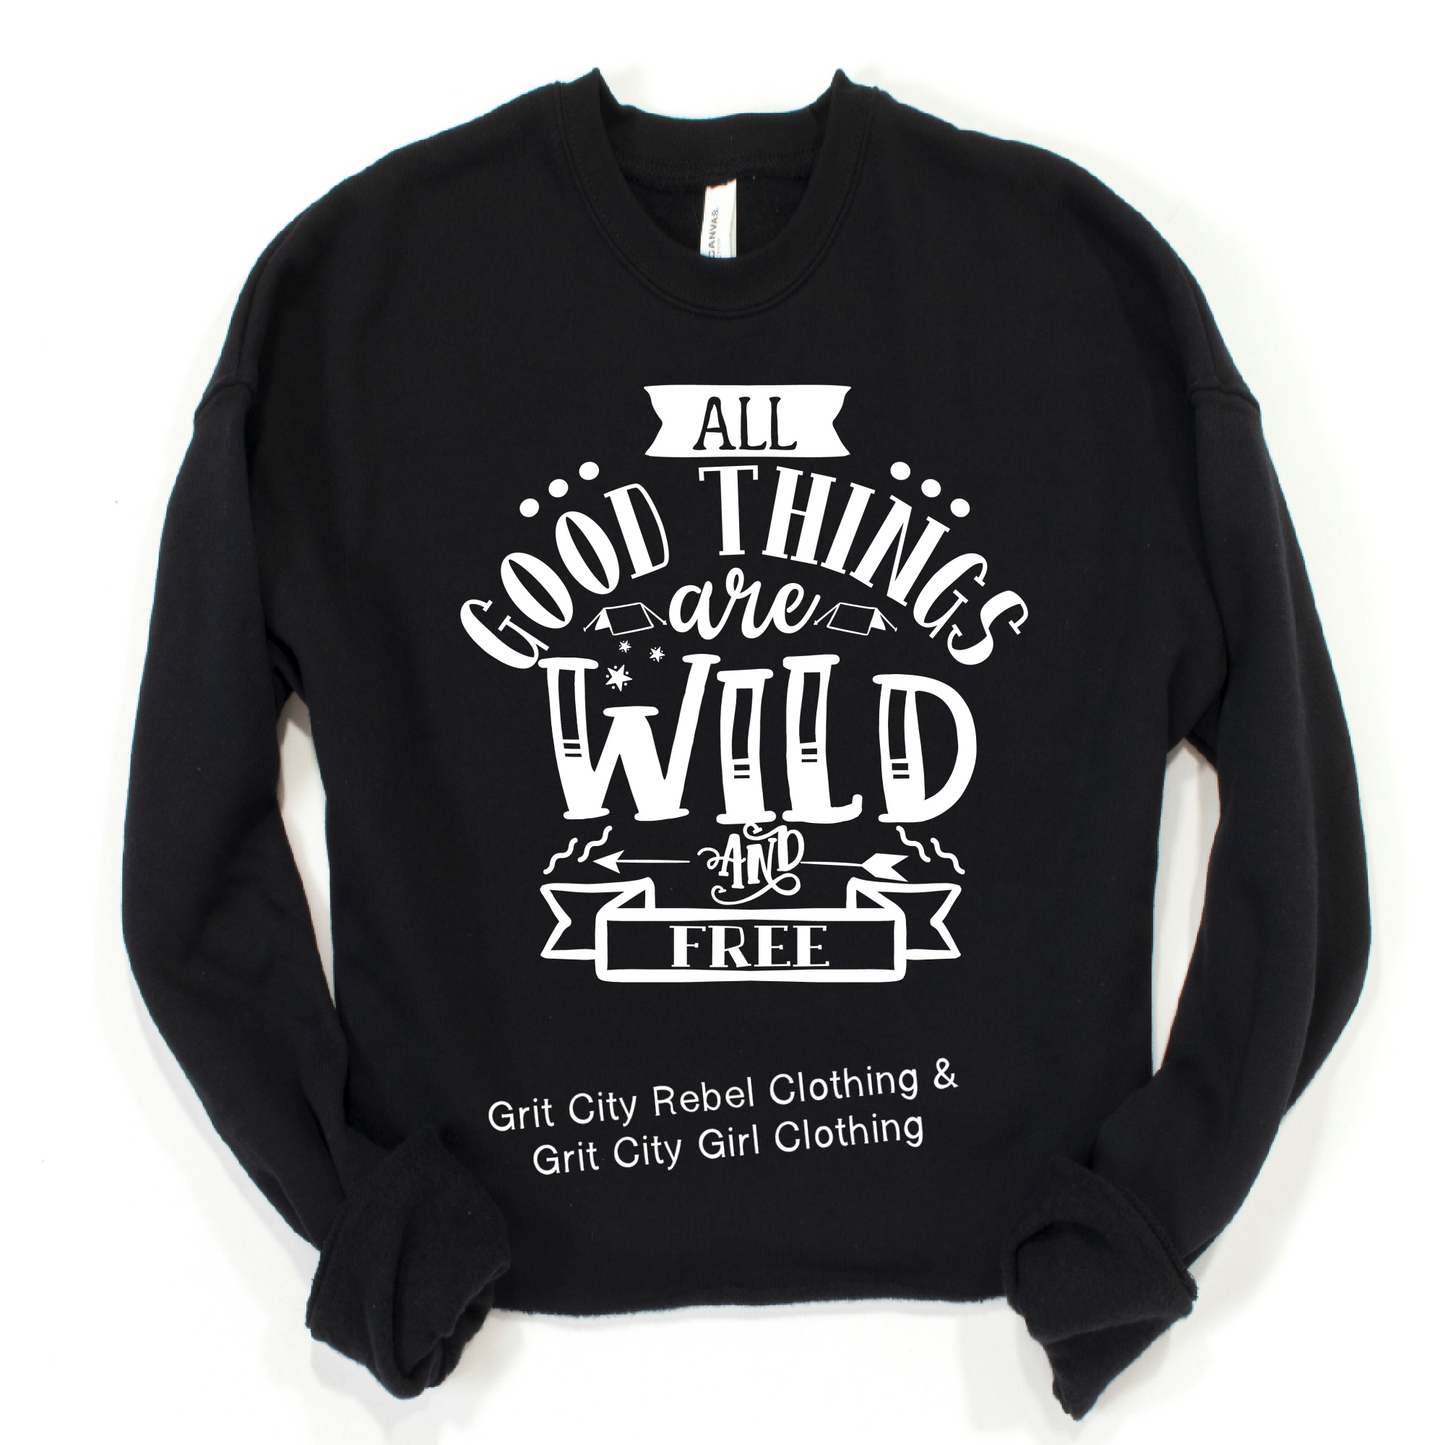 Grit City Rebel Black crew neck sweatshirt with the writing All Good Things are wild and Free sizes small to 3X